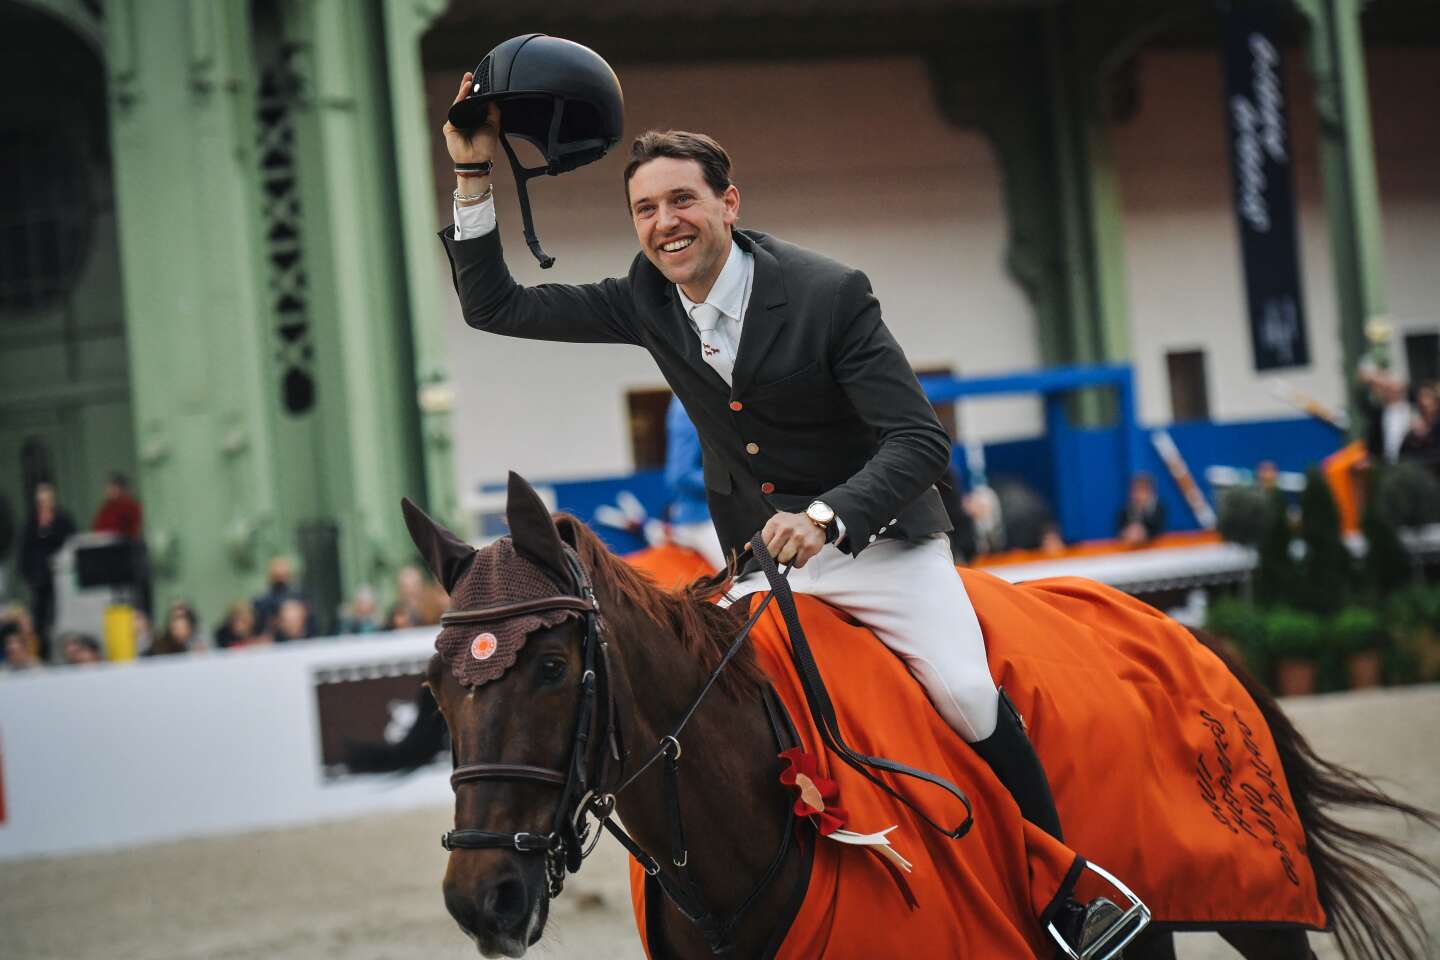 the last lap of honor for Hermès Ryan, the mythical horse of Simon Delestre